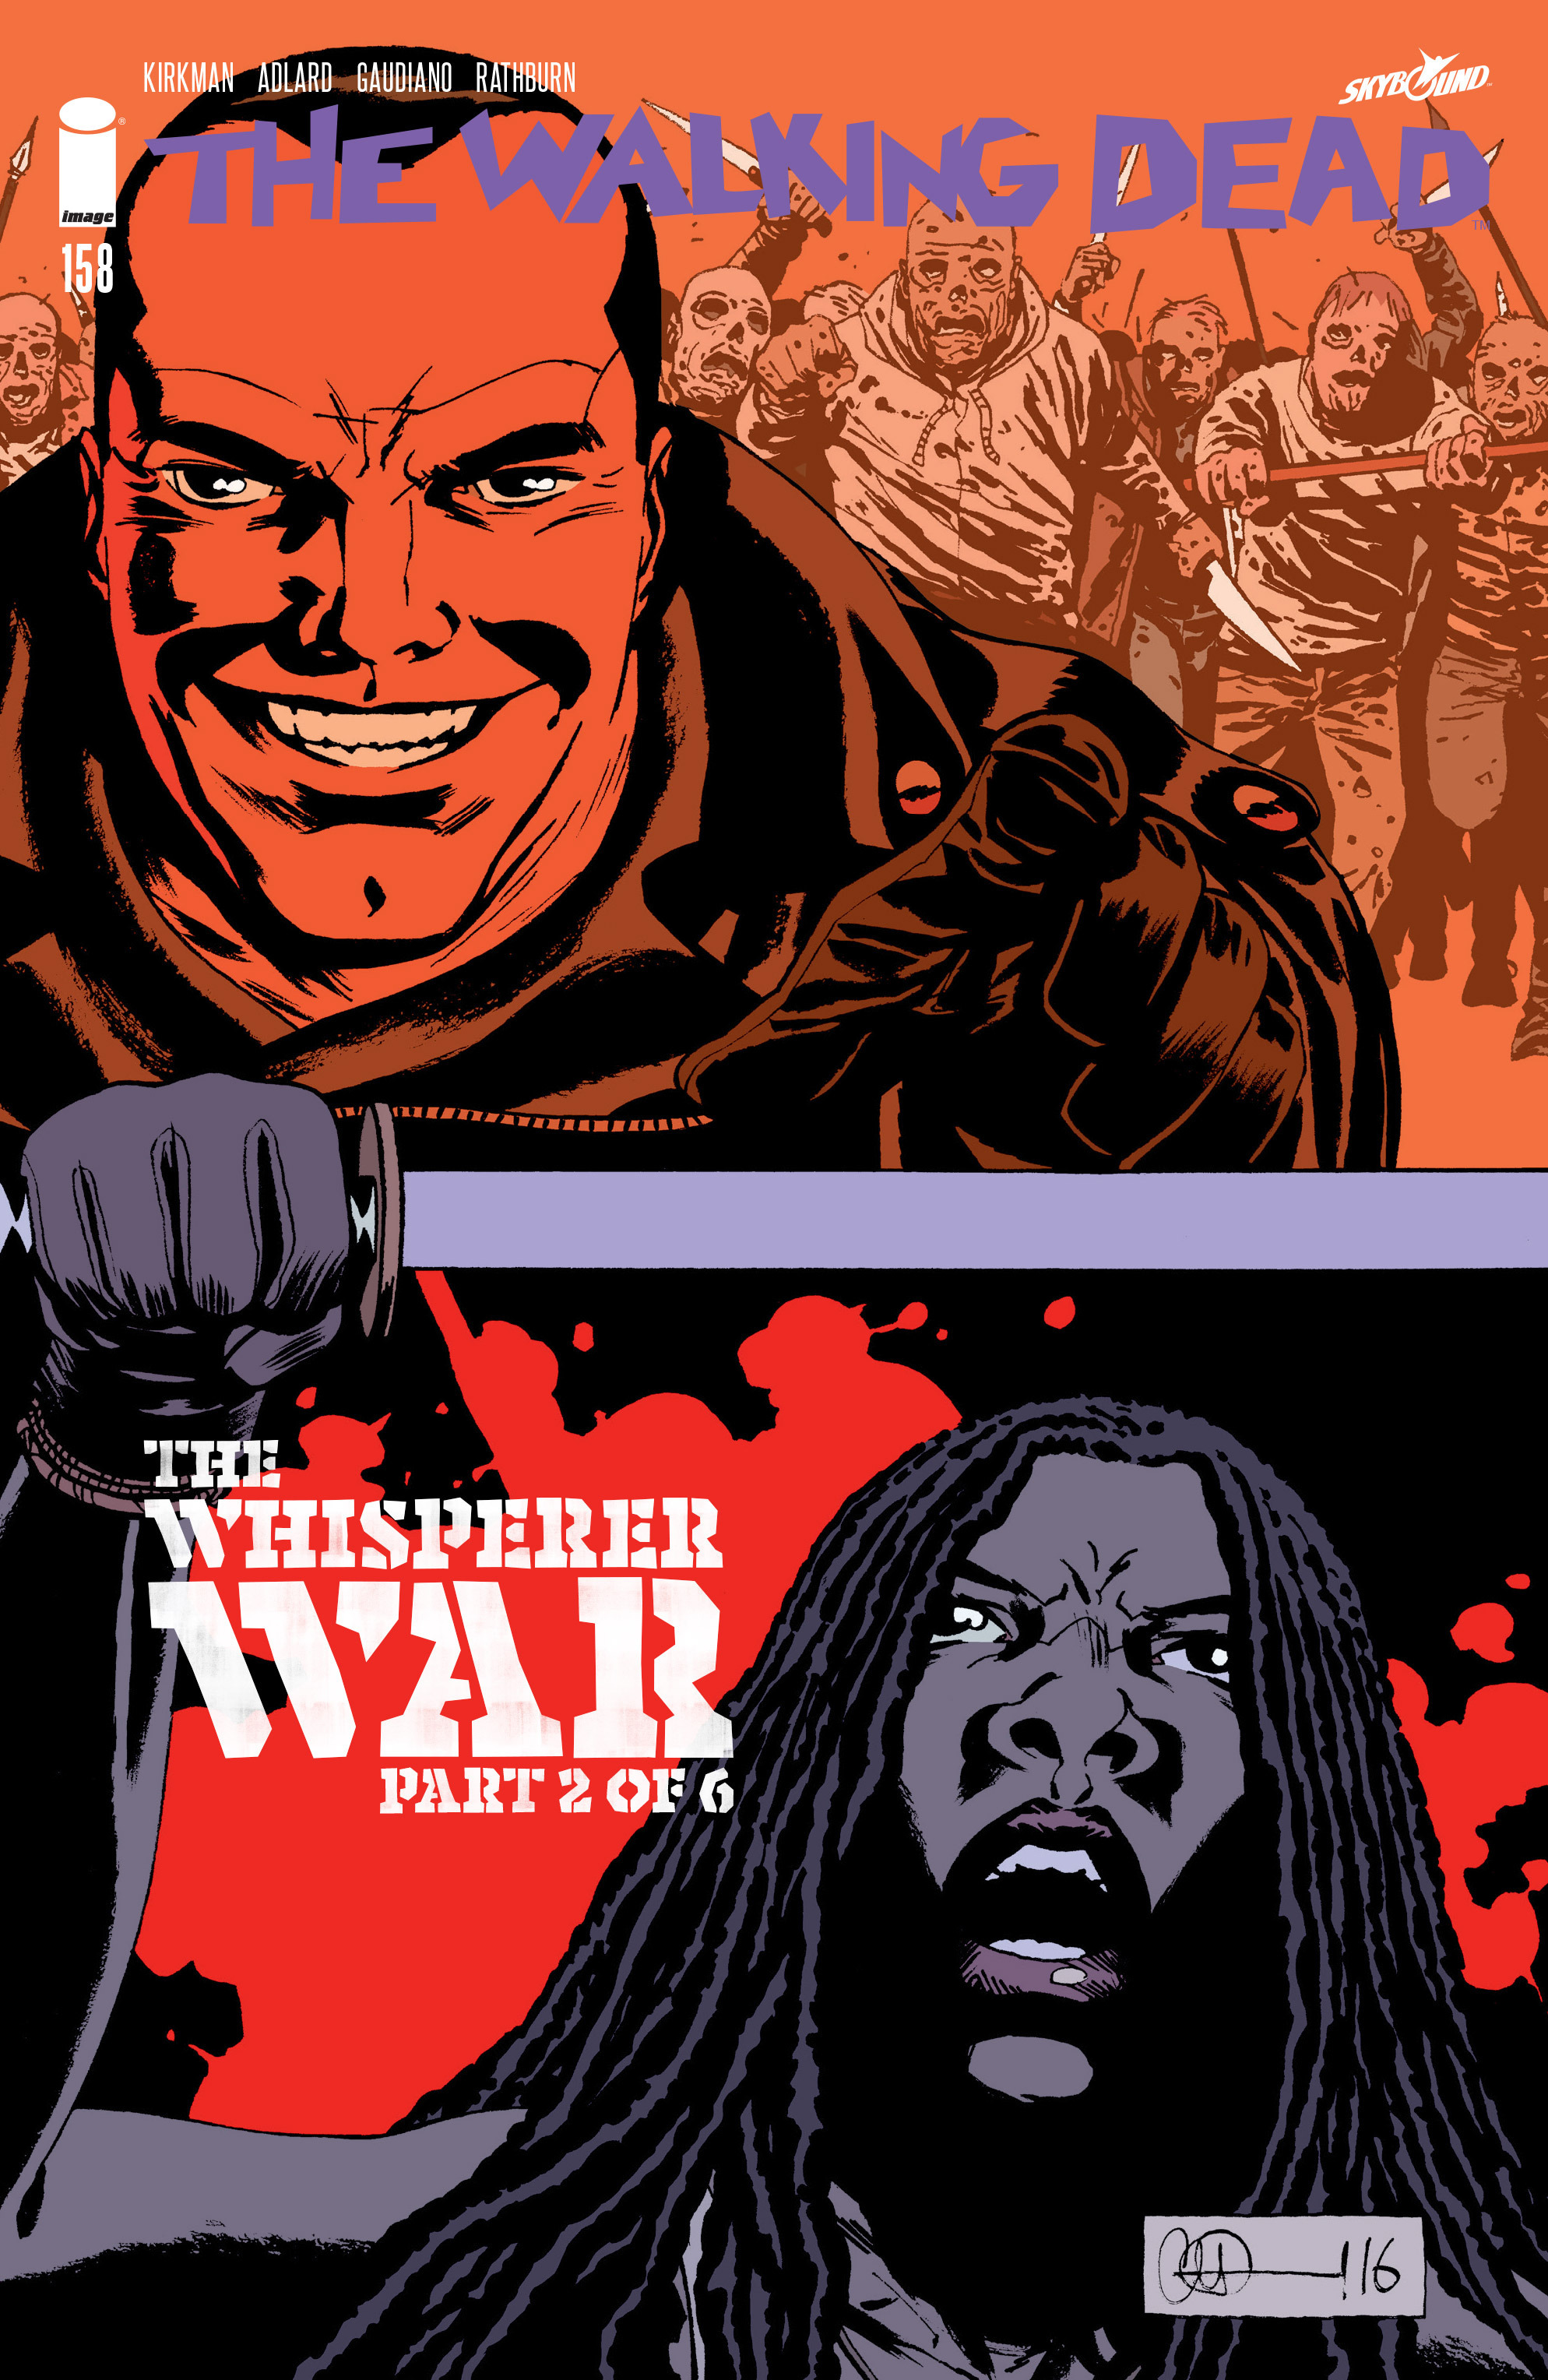 the-walking-dead-158-cover